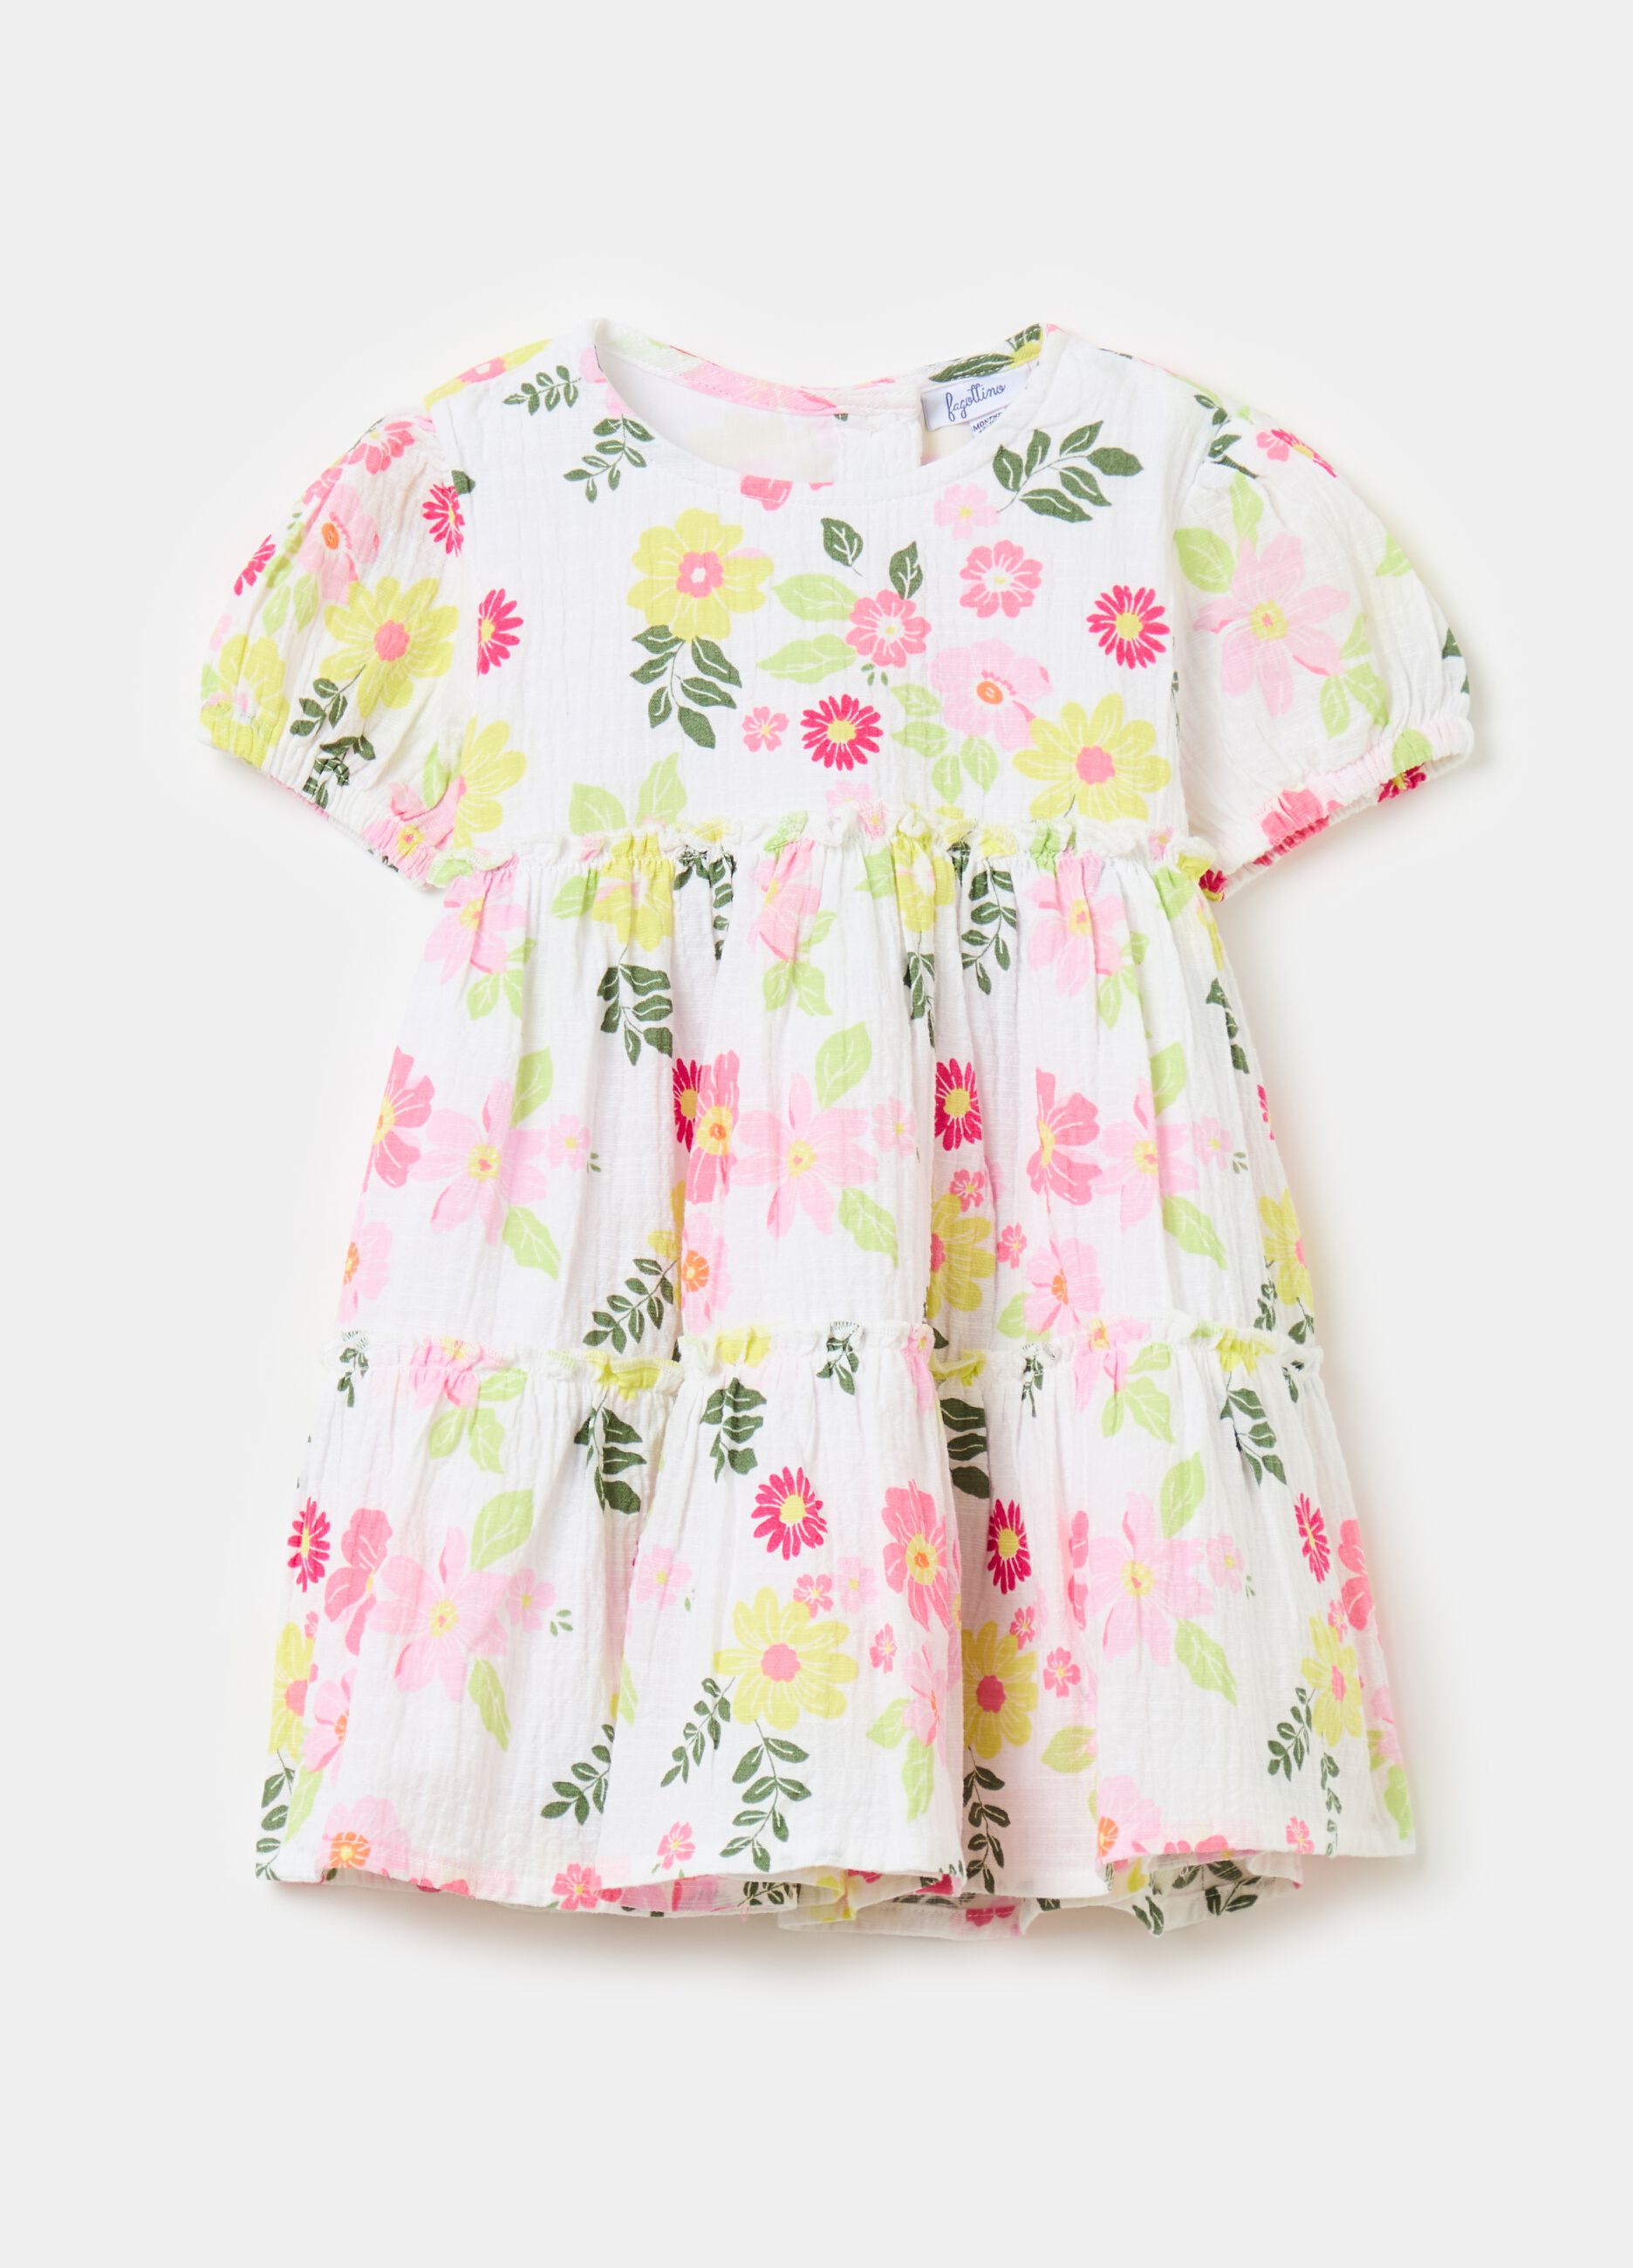 Tiered dress with floral pattern